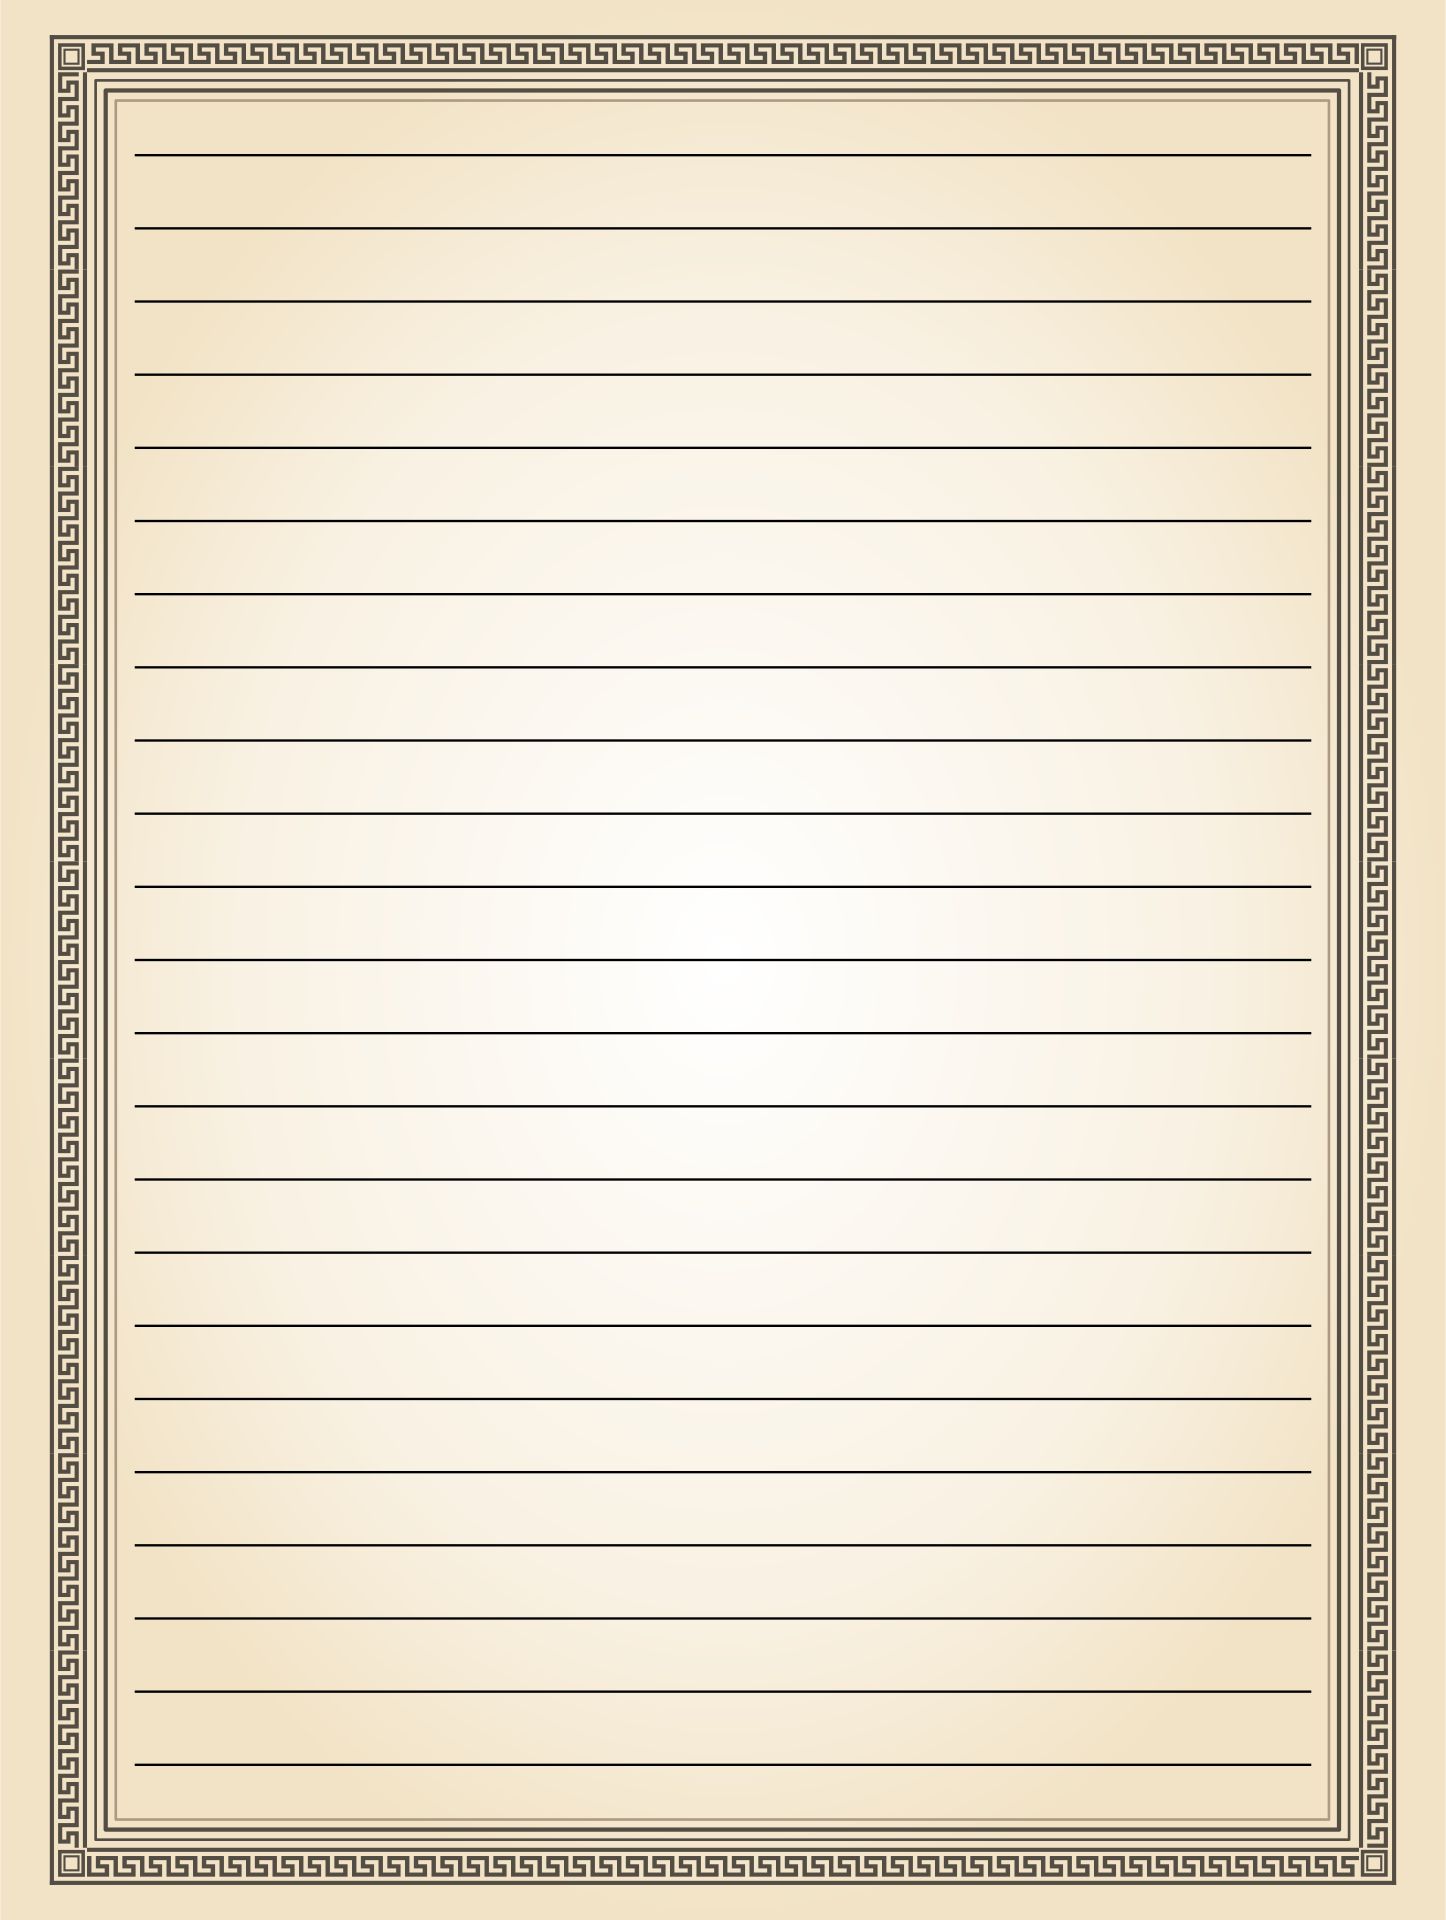 Printable Border Lined Writing Paper